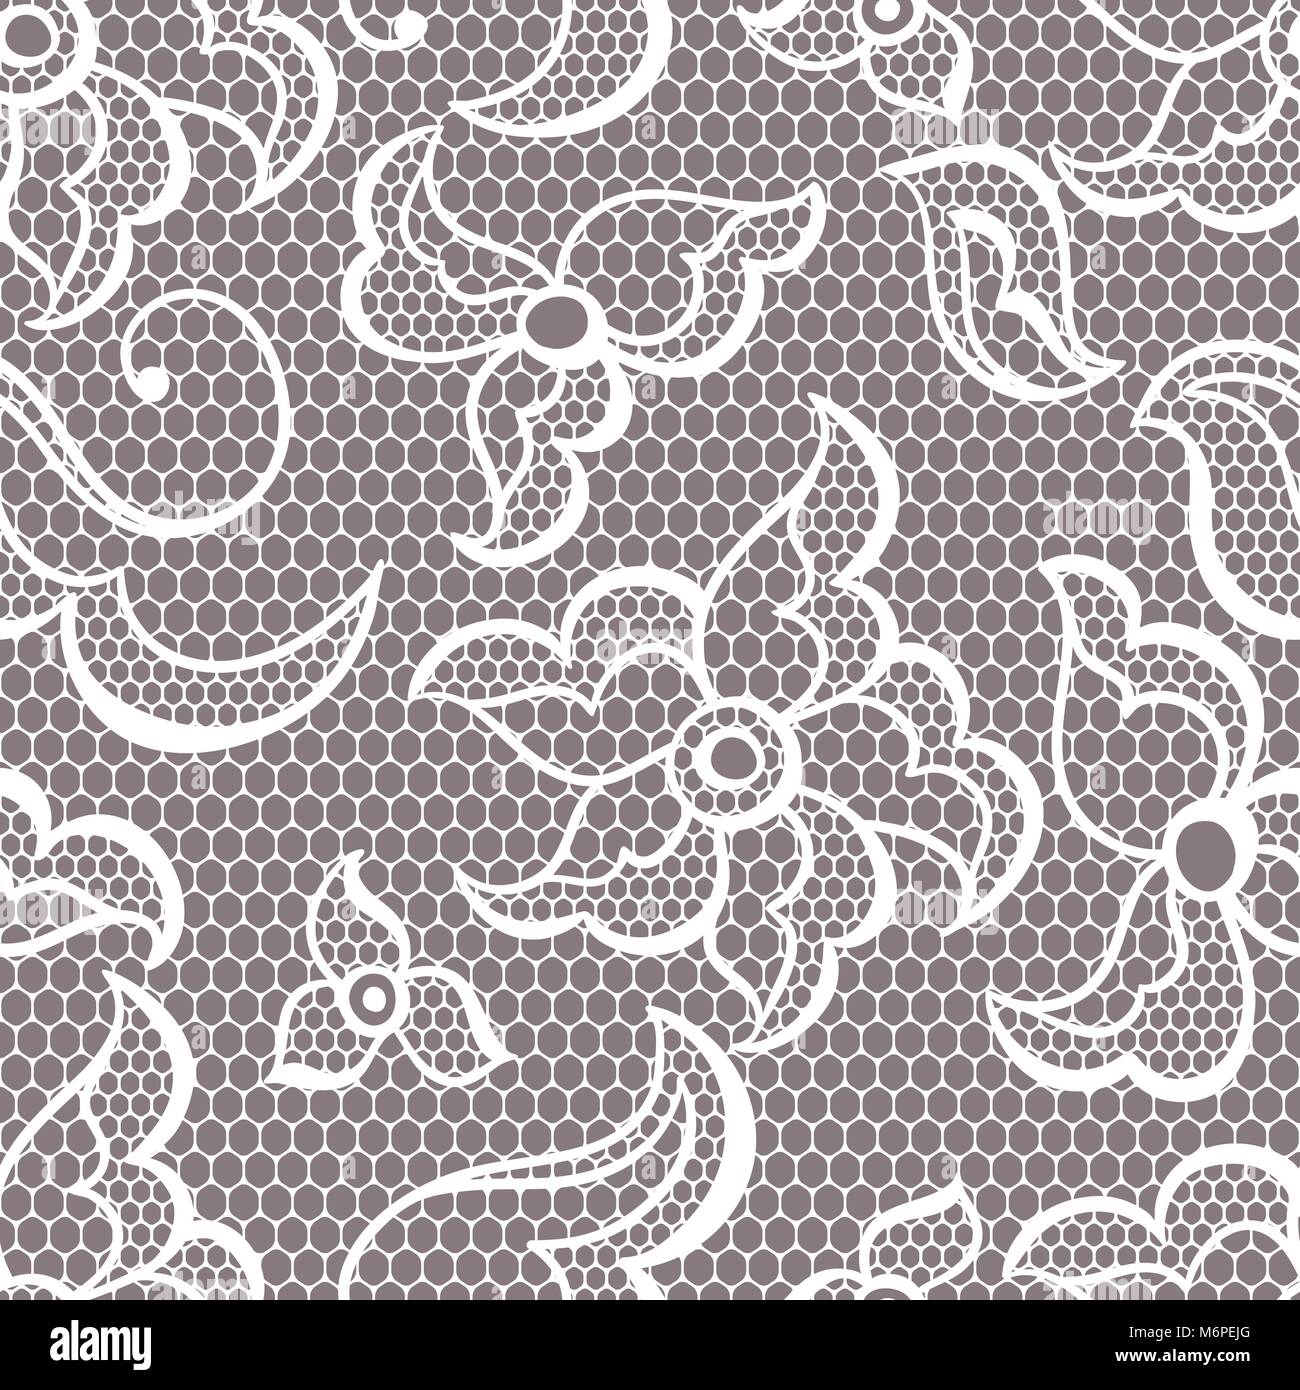 Black lace fabric seamless pattern Royalty Free Vector Image